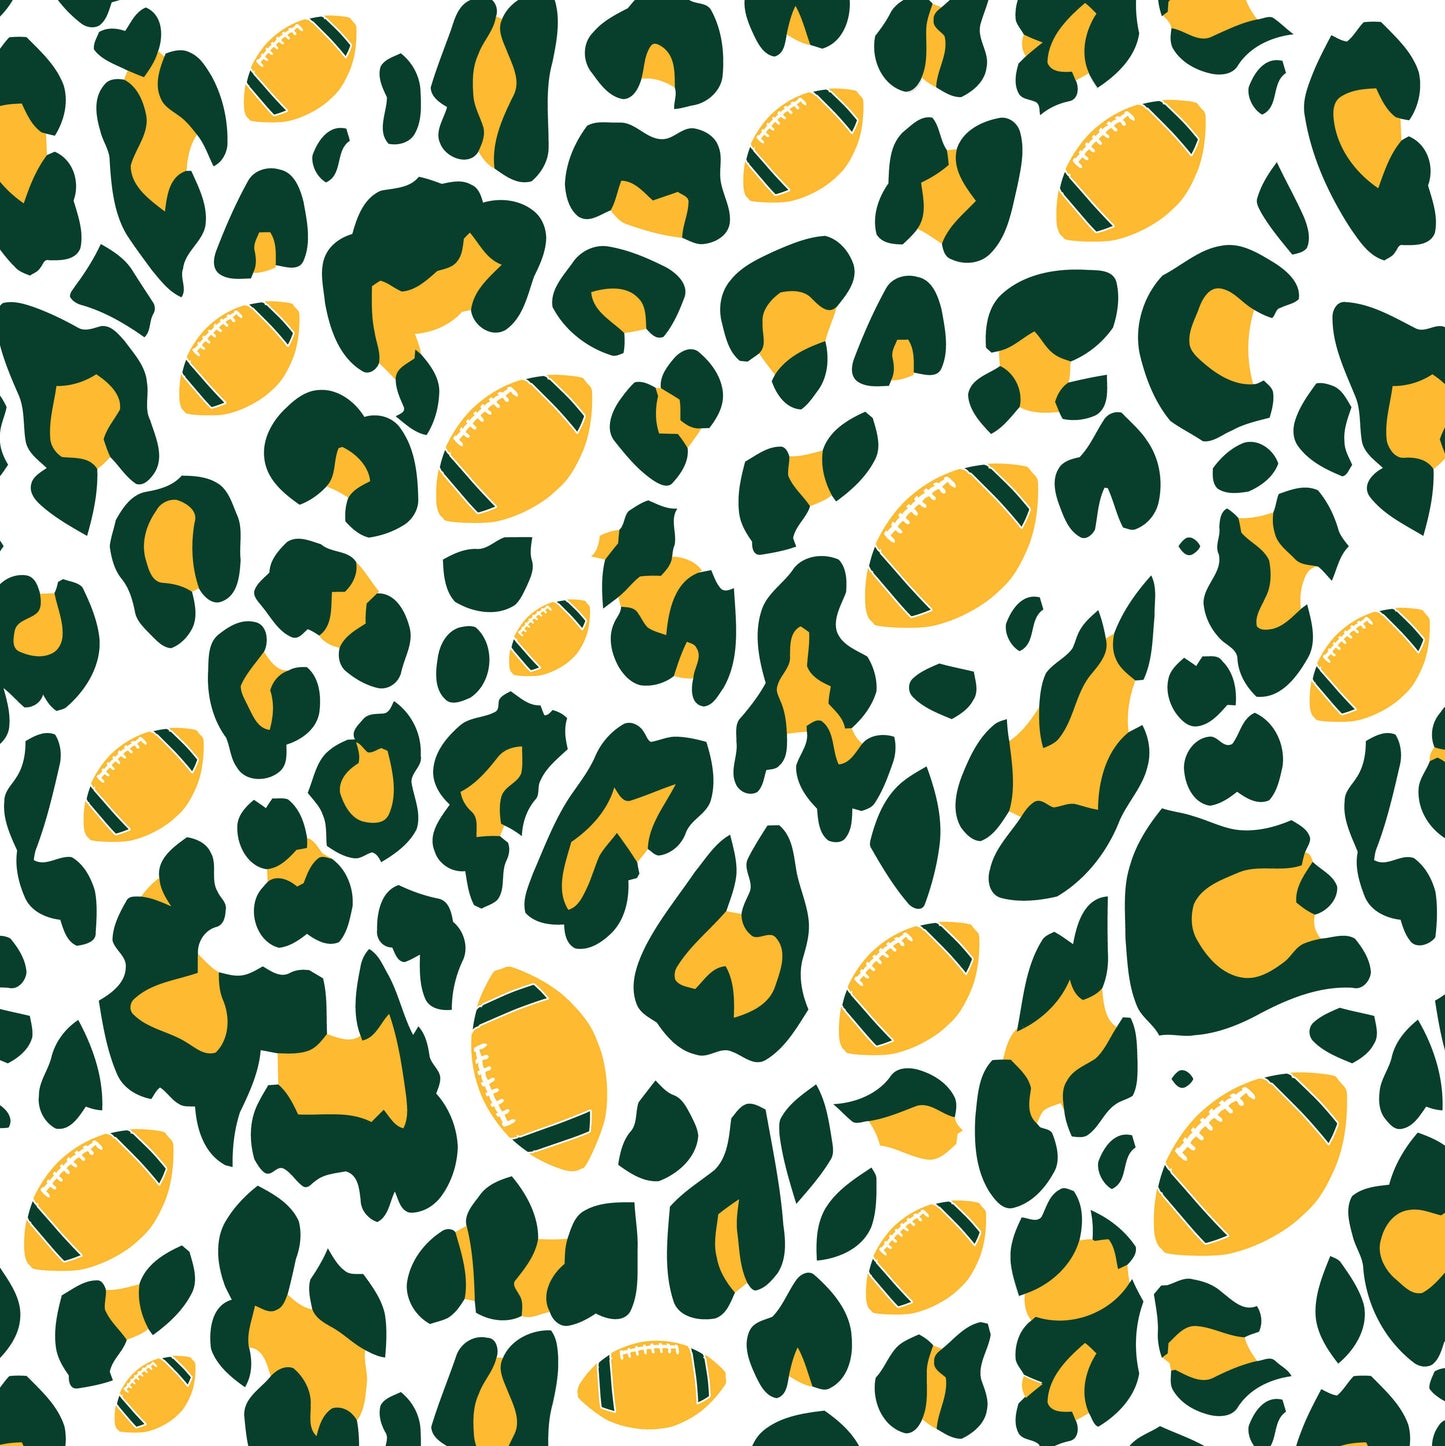 LEOPARD FOOTBALL PRINT - GREEN AND YELLOW 10